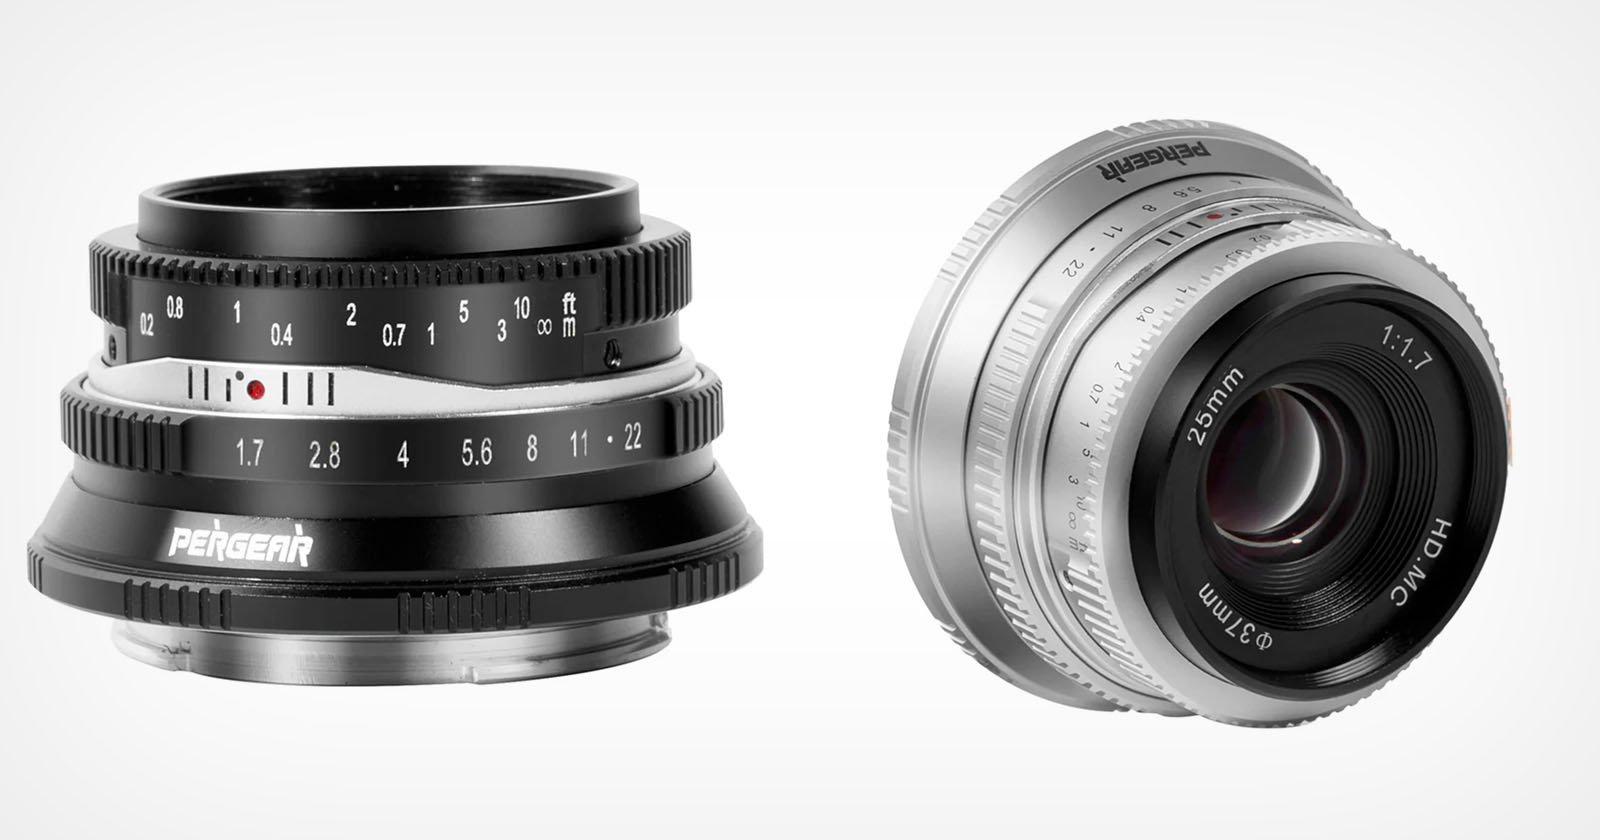 Pergears New 25mm f/1.7 APS-C Lens Is Available Now for $69